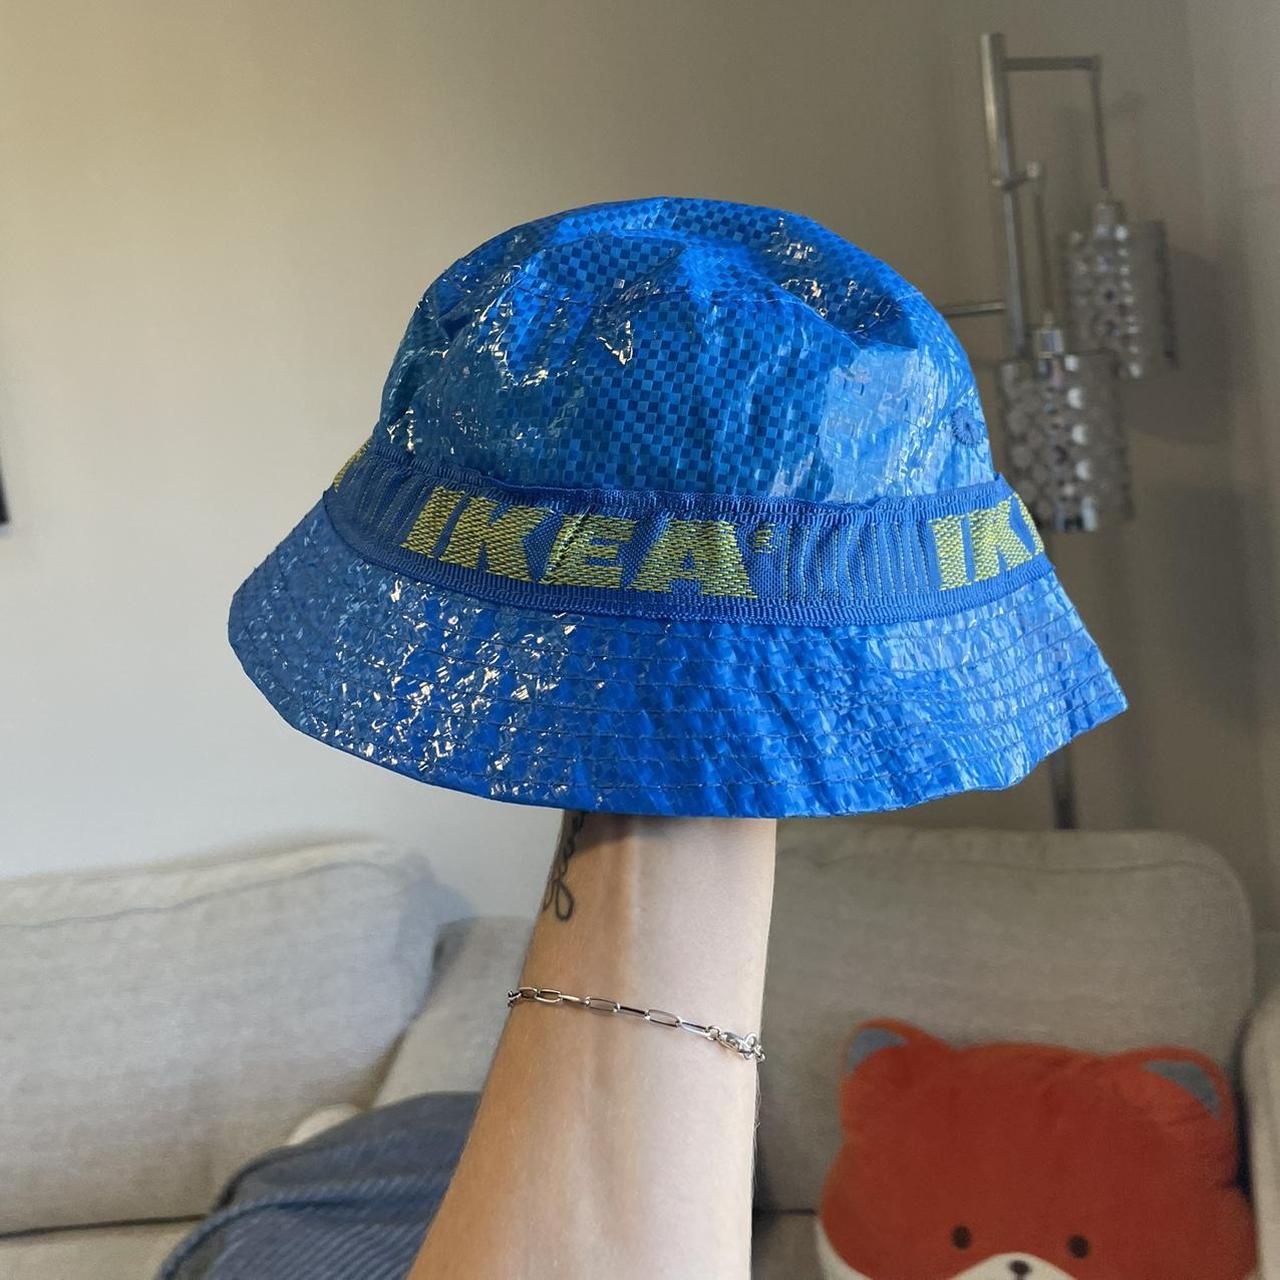 IKEA Women's Blue and Yellow Hat